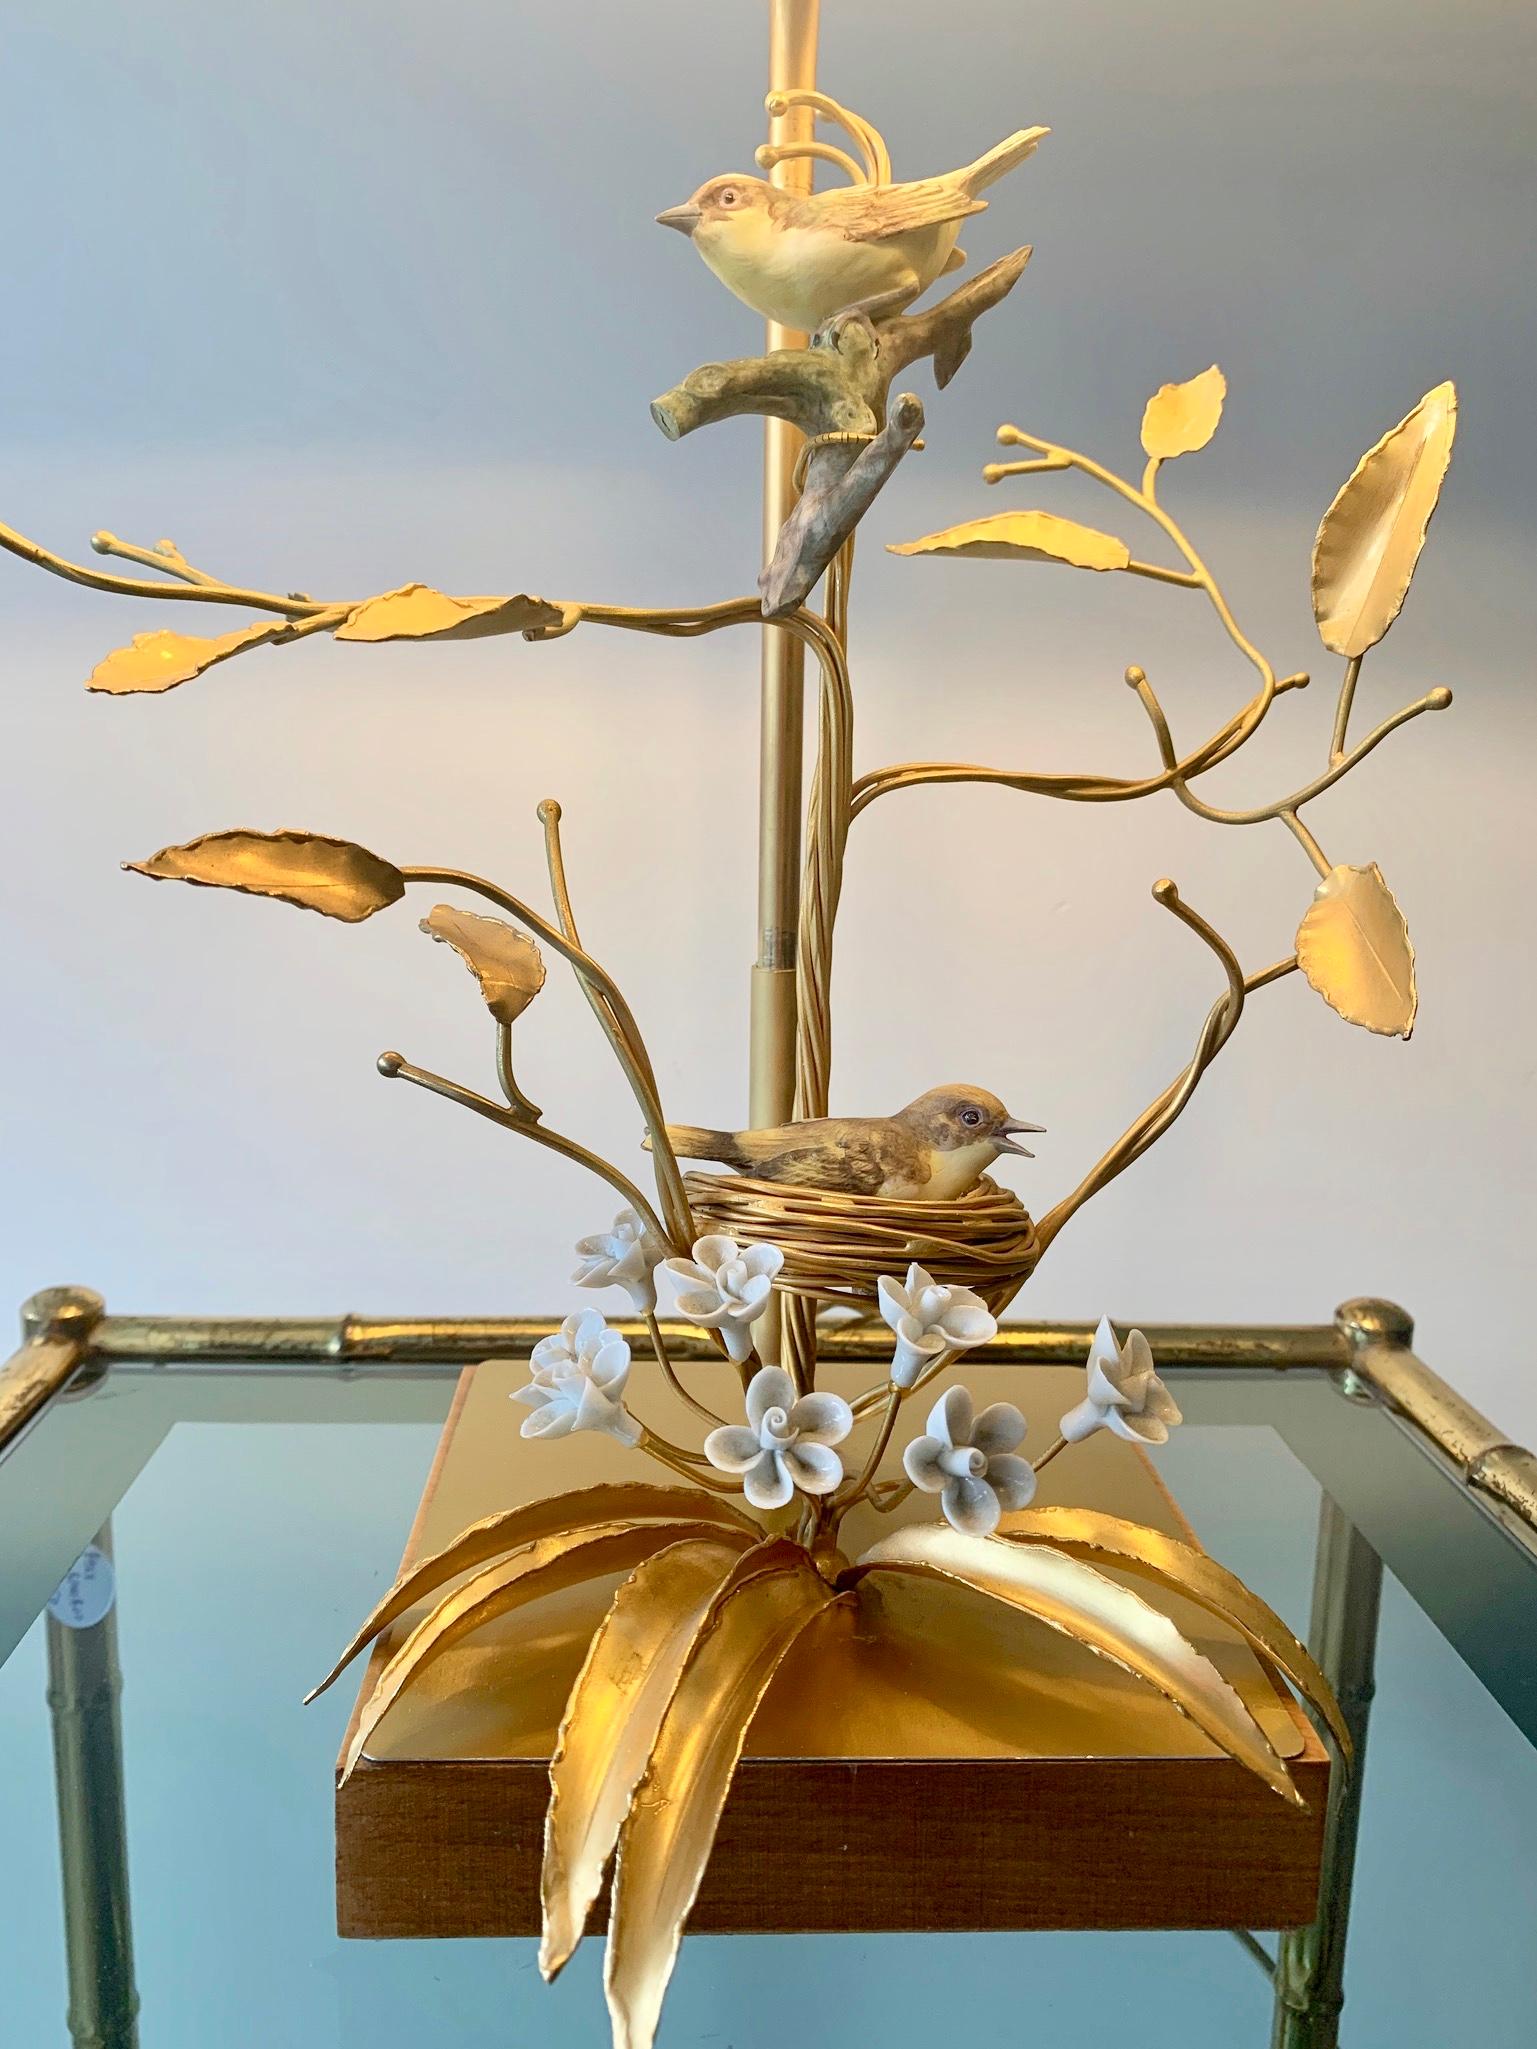 Stunning table lamp in Holywood Regency style. Wooden base with intricate metal gild work depicting tree branches holding a birds nest. The birds and flowers are made of beautiful biscuit porcelain.
 
The lamp stand is adjustable in height. Pagoda